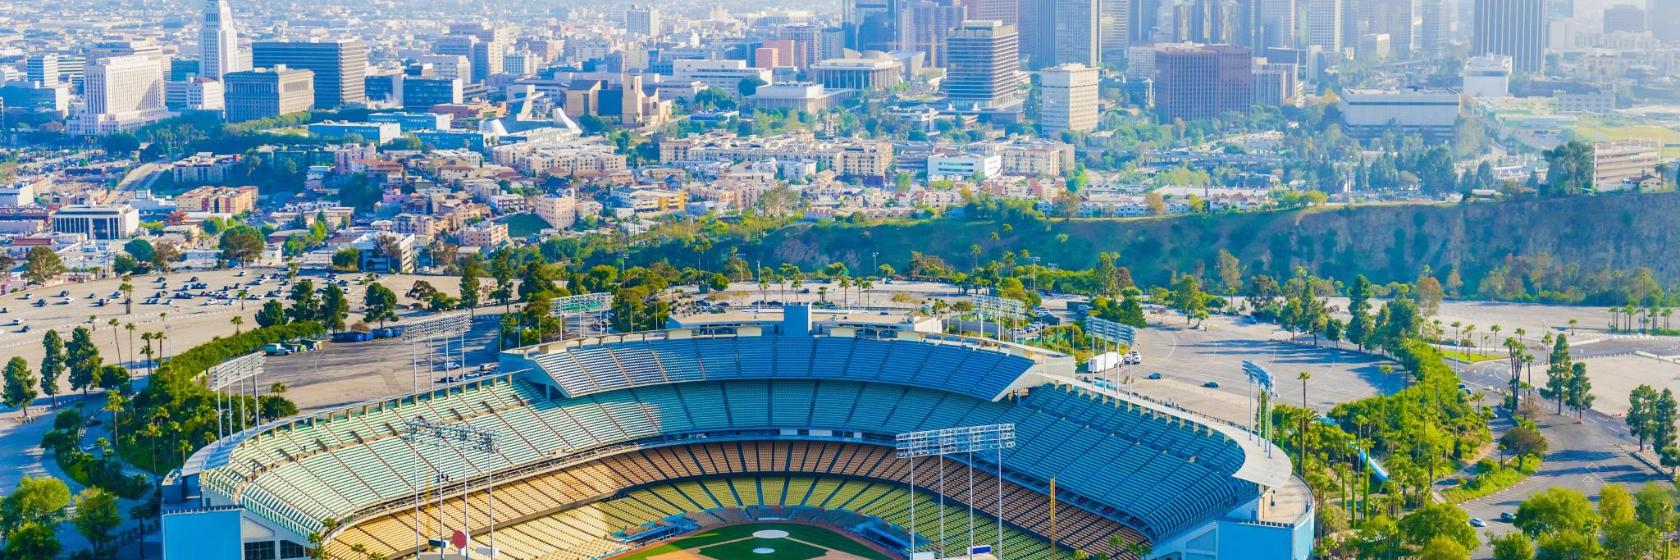 The 10 best hotels near Dodger Stadium in Los Angeles, United States of  America